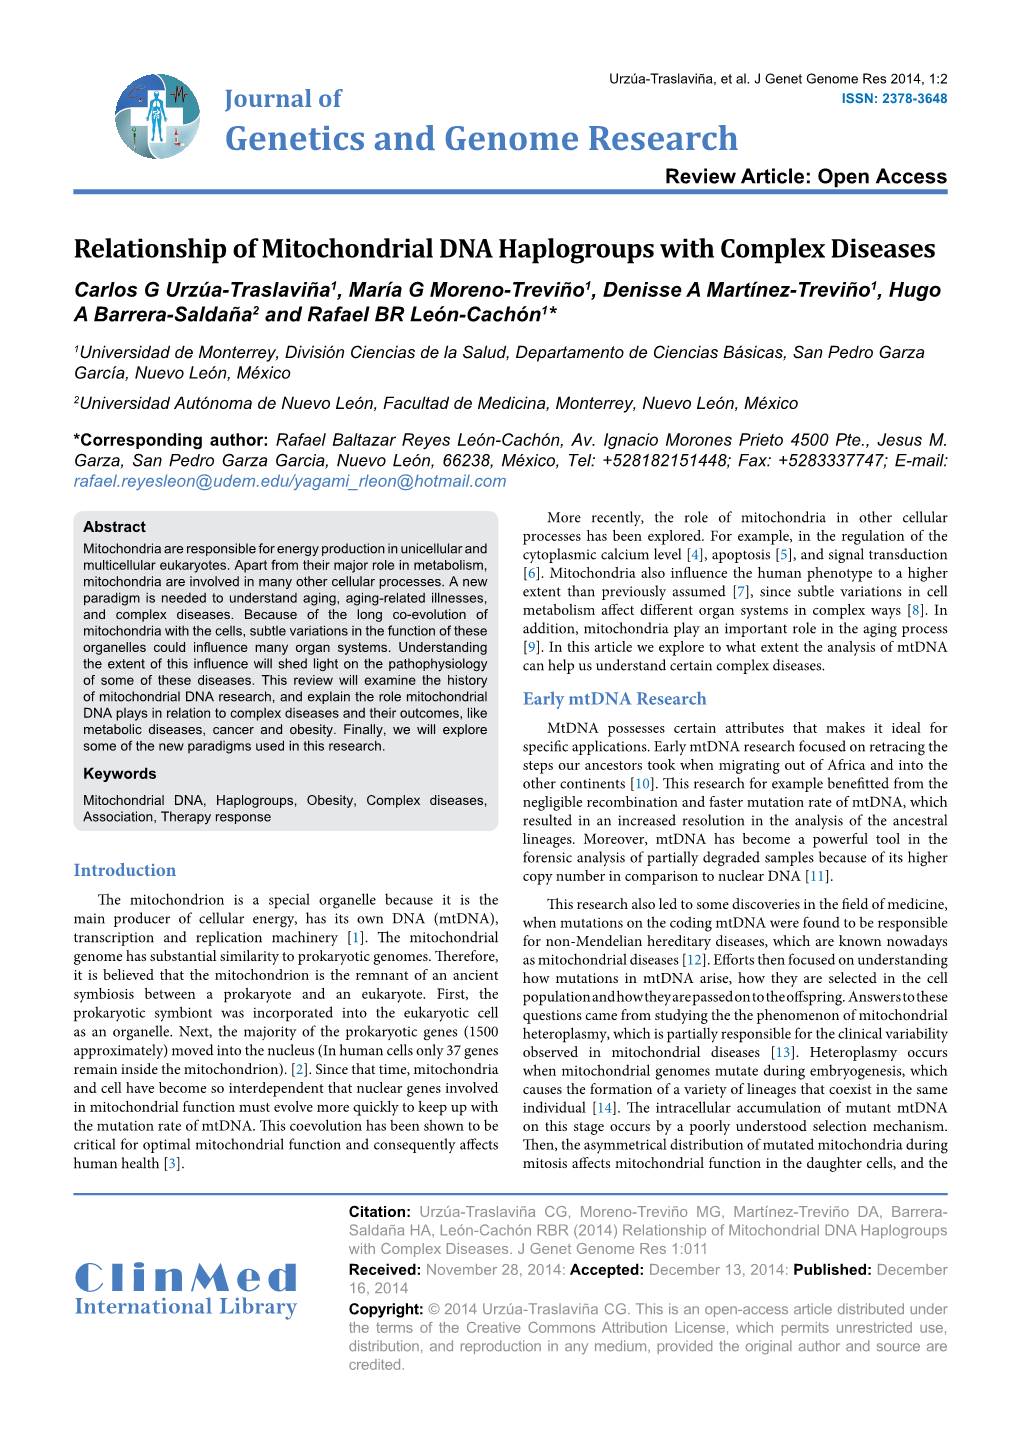 Relationship of Mitochondrial DNA Haplogroups with Complex Diseases